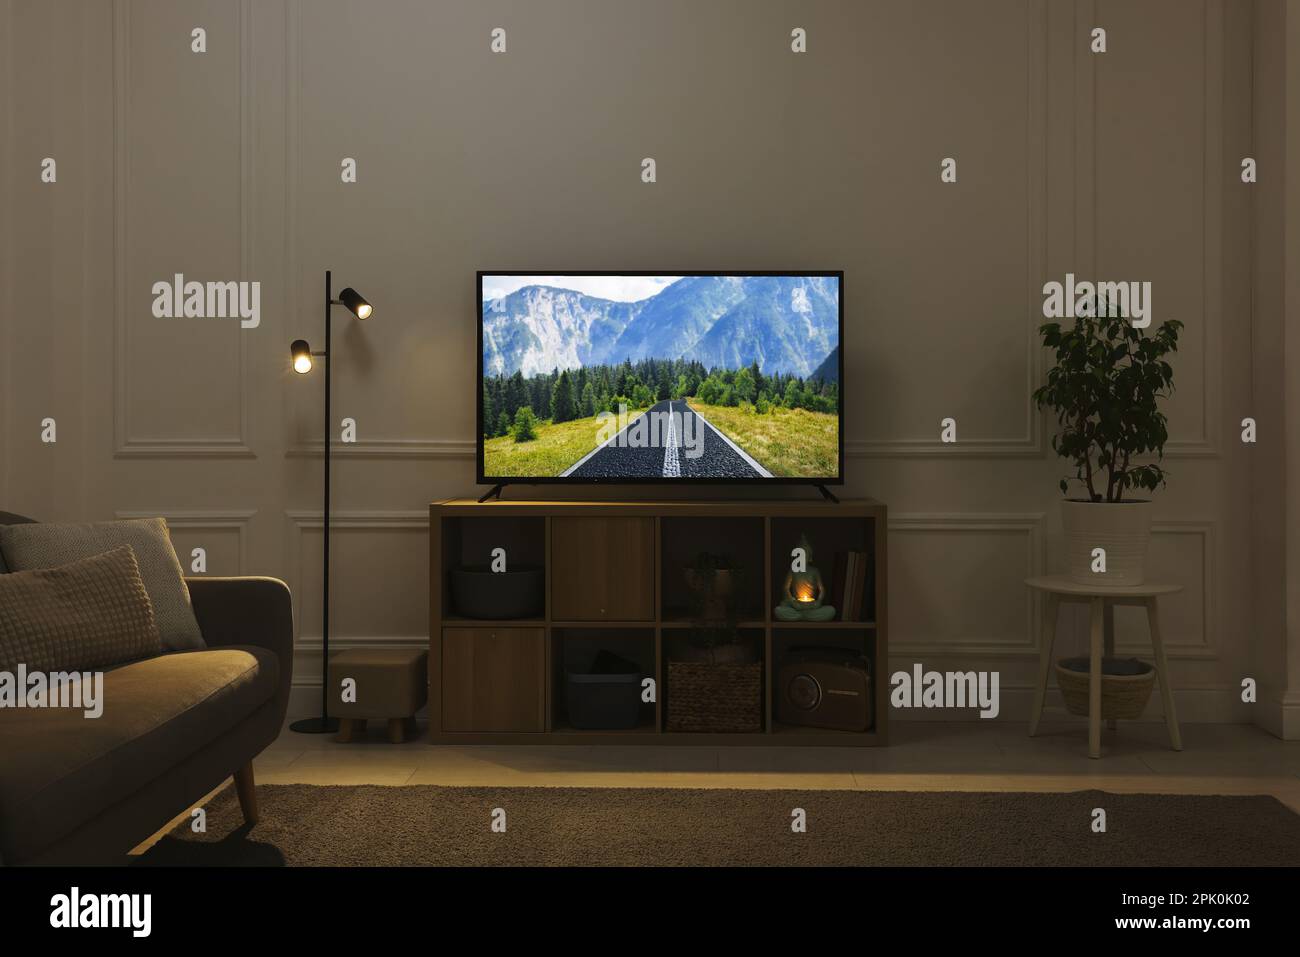 Modern TV set on wooden stand in room. Scene of nature themed movie on screen Stock Photo